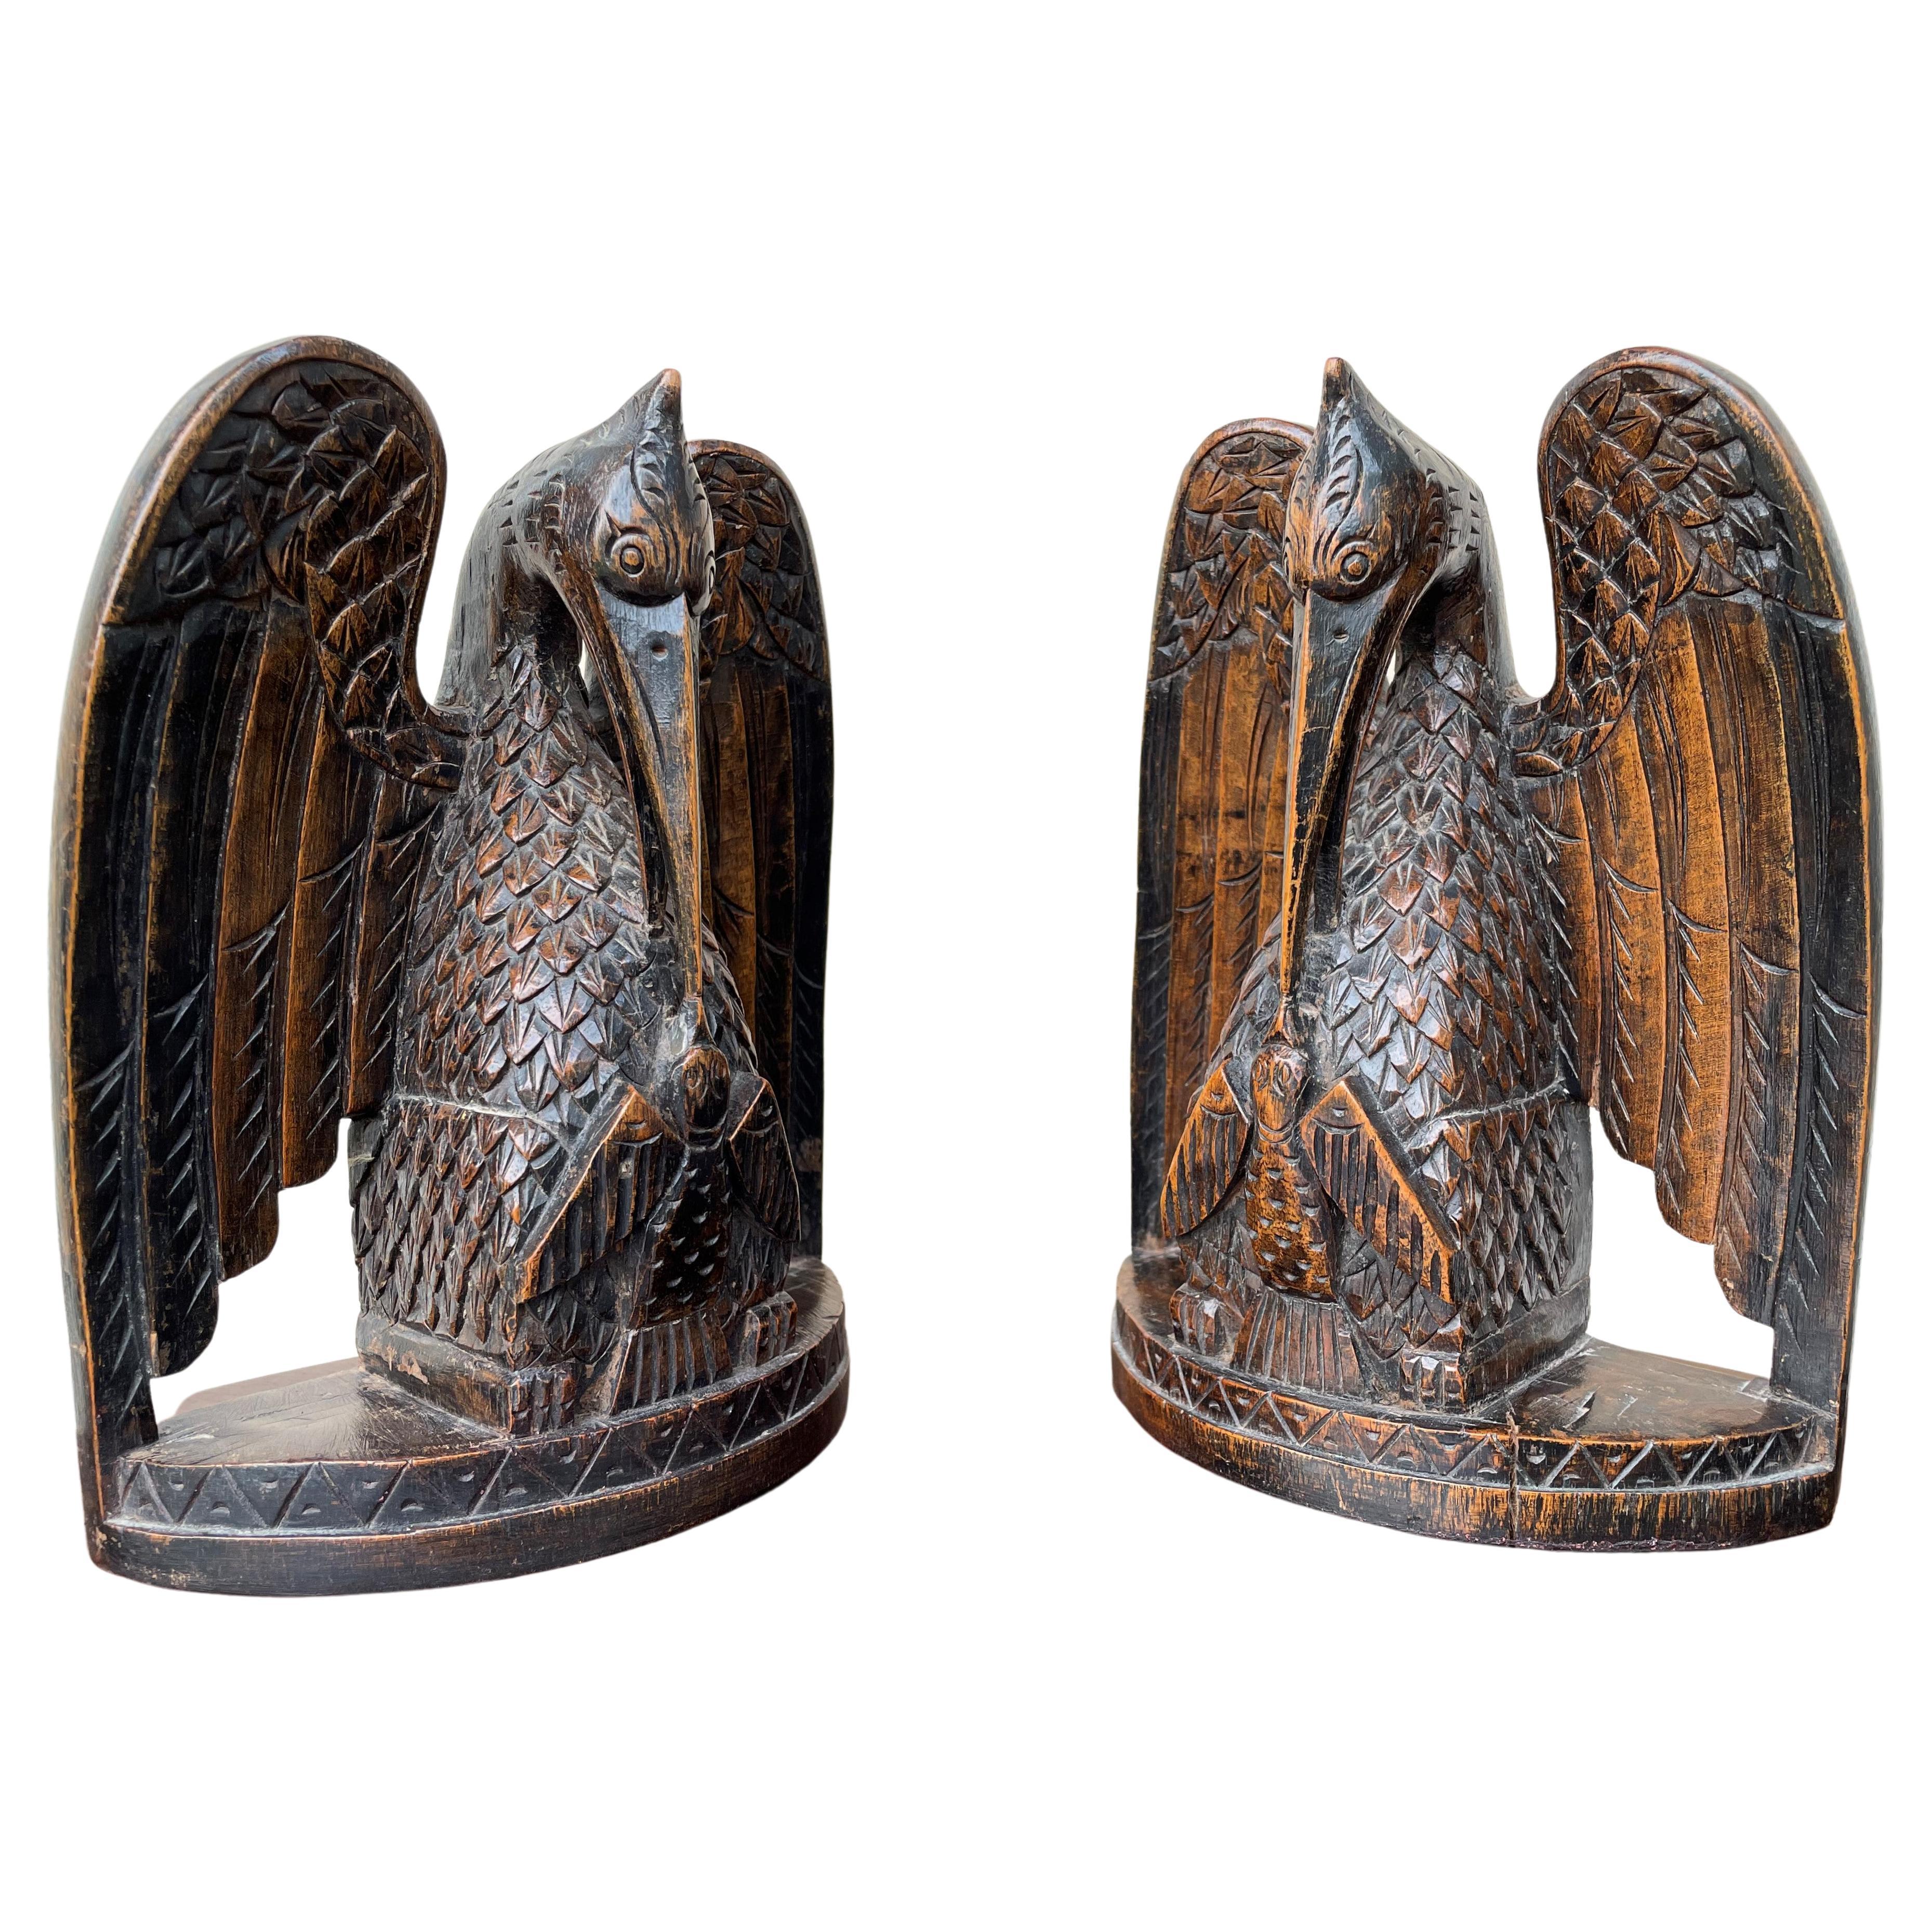 Antique Hand Carved Gothic Art Feeding Pelicans as Symbol of Christ Bookends